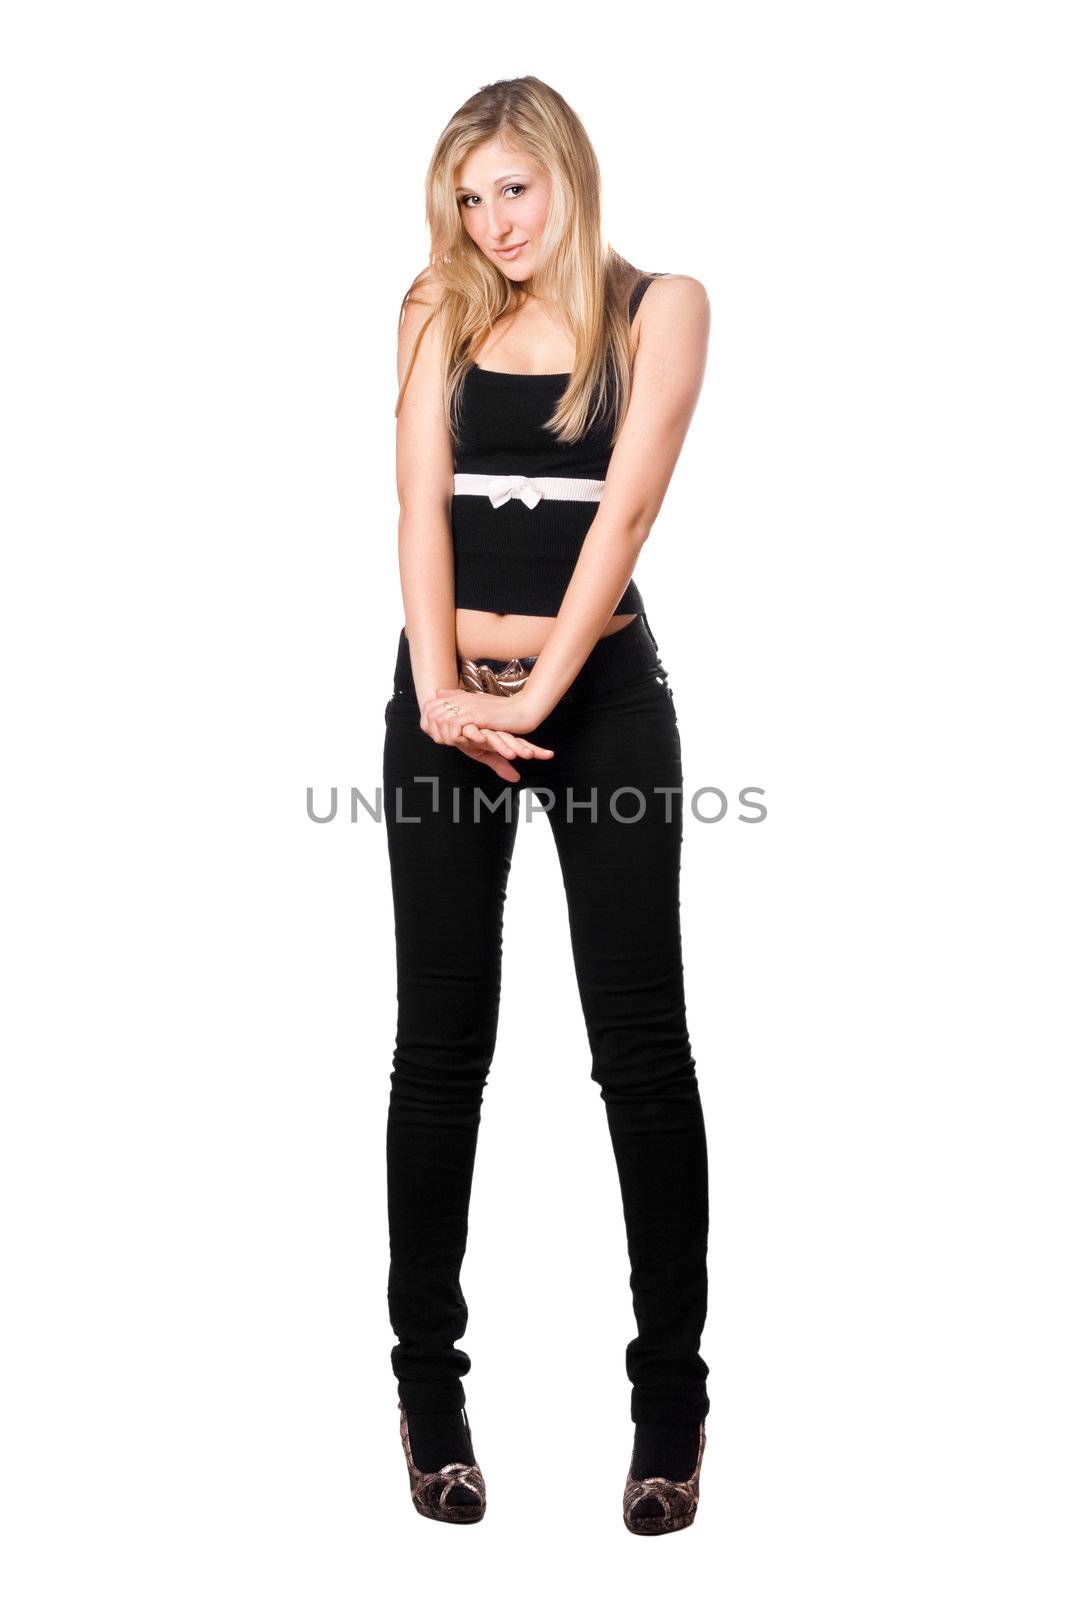 Playful blond woman in black clothes. Isolated on white